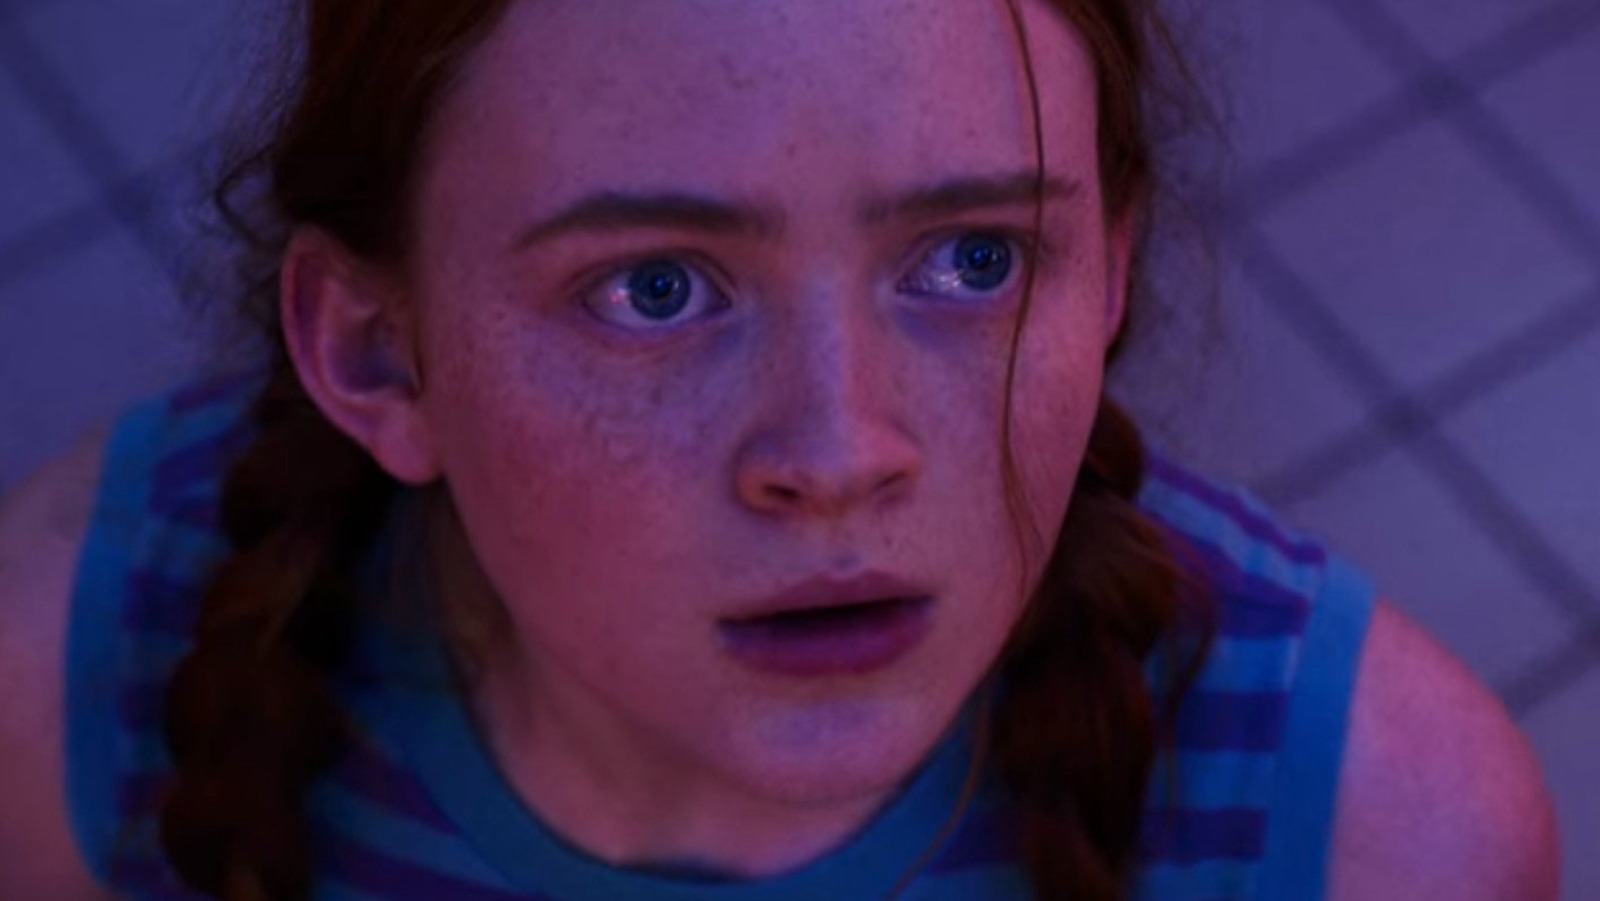 Is Max dead in Stranger Things?